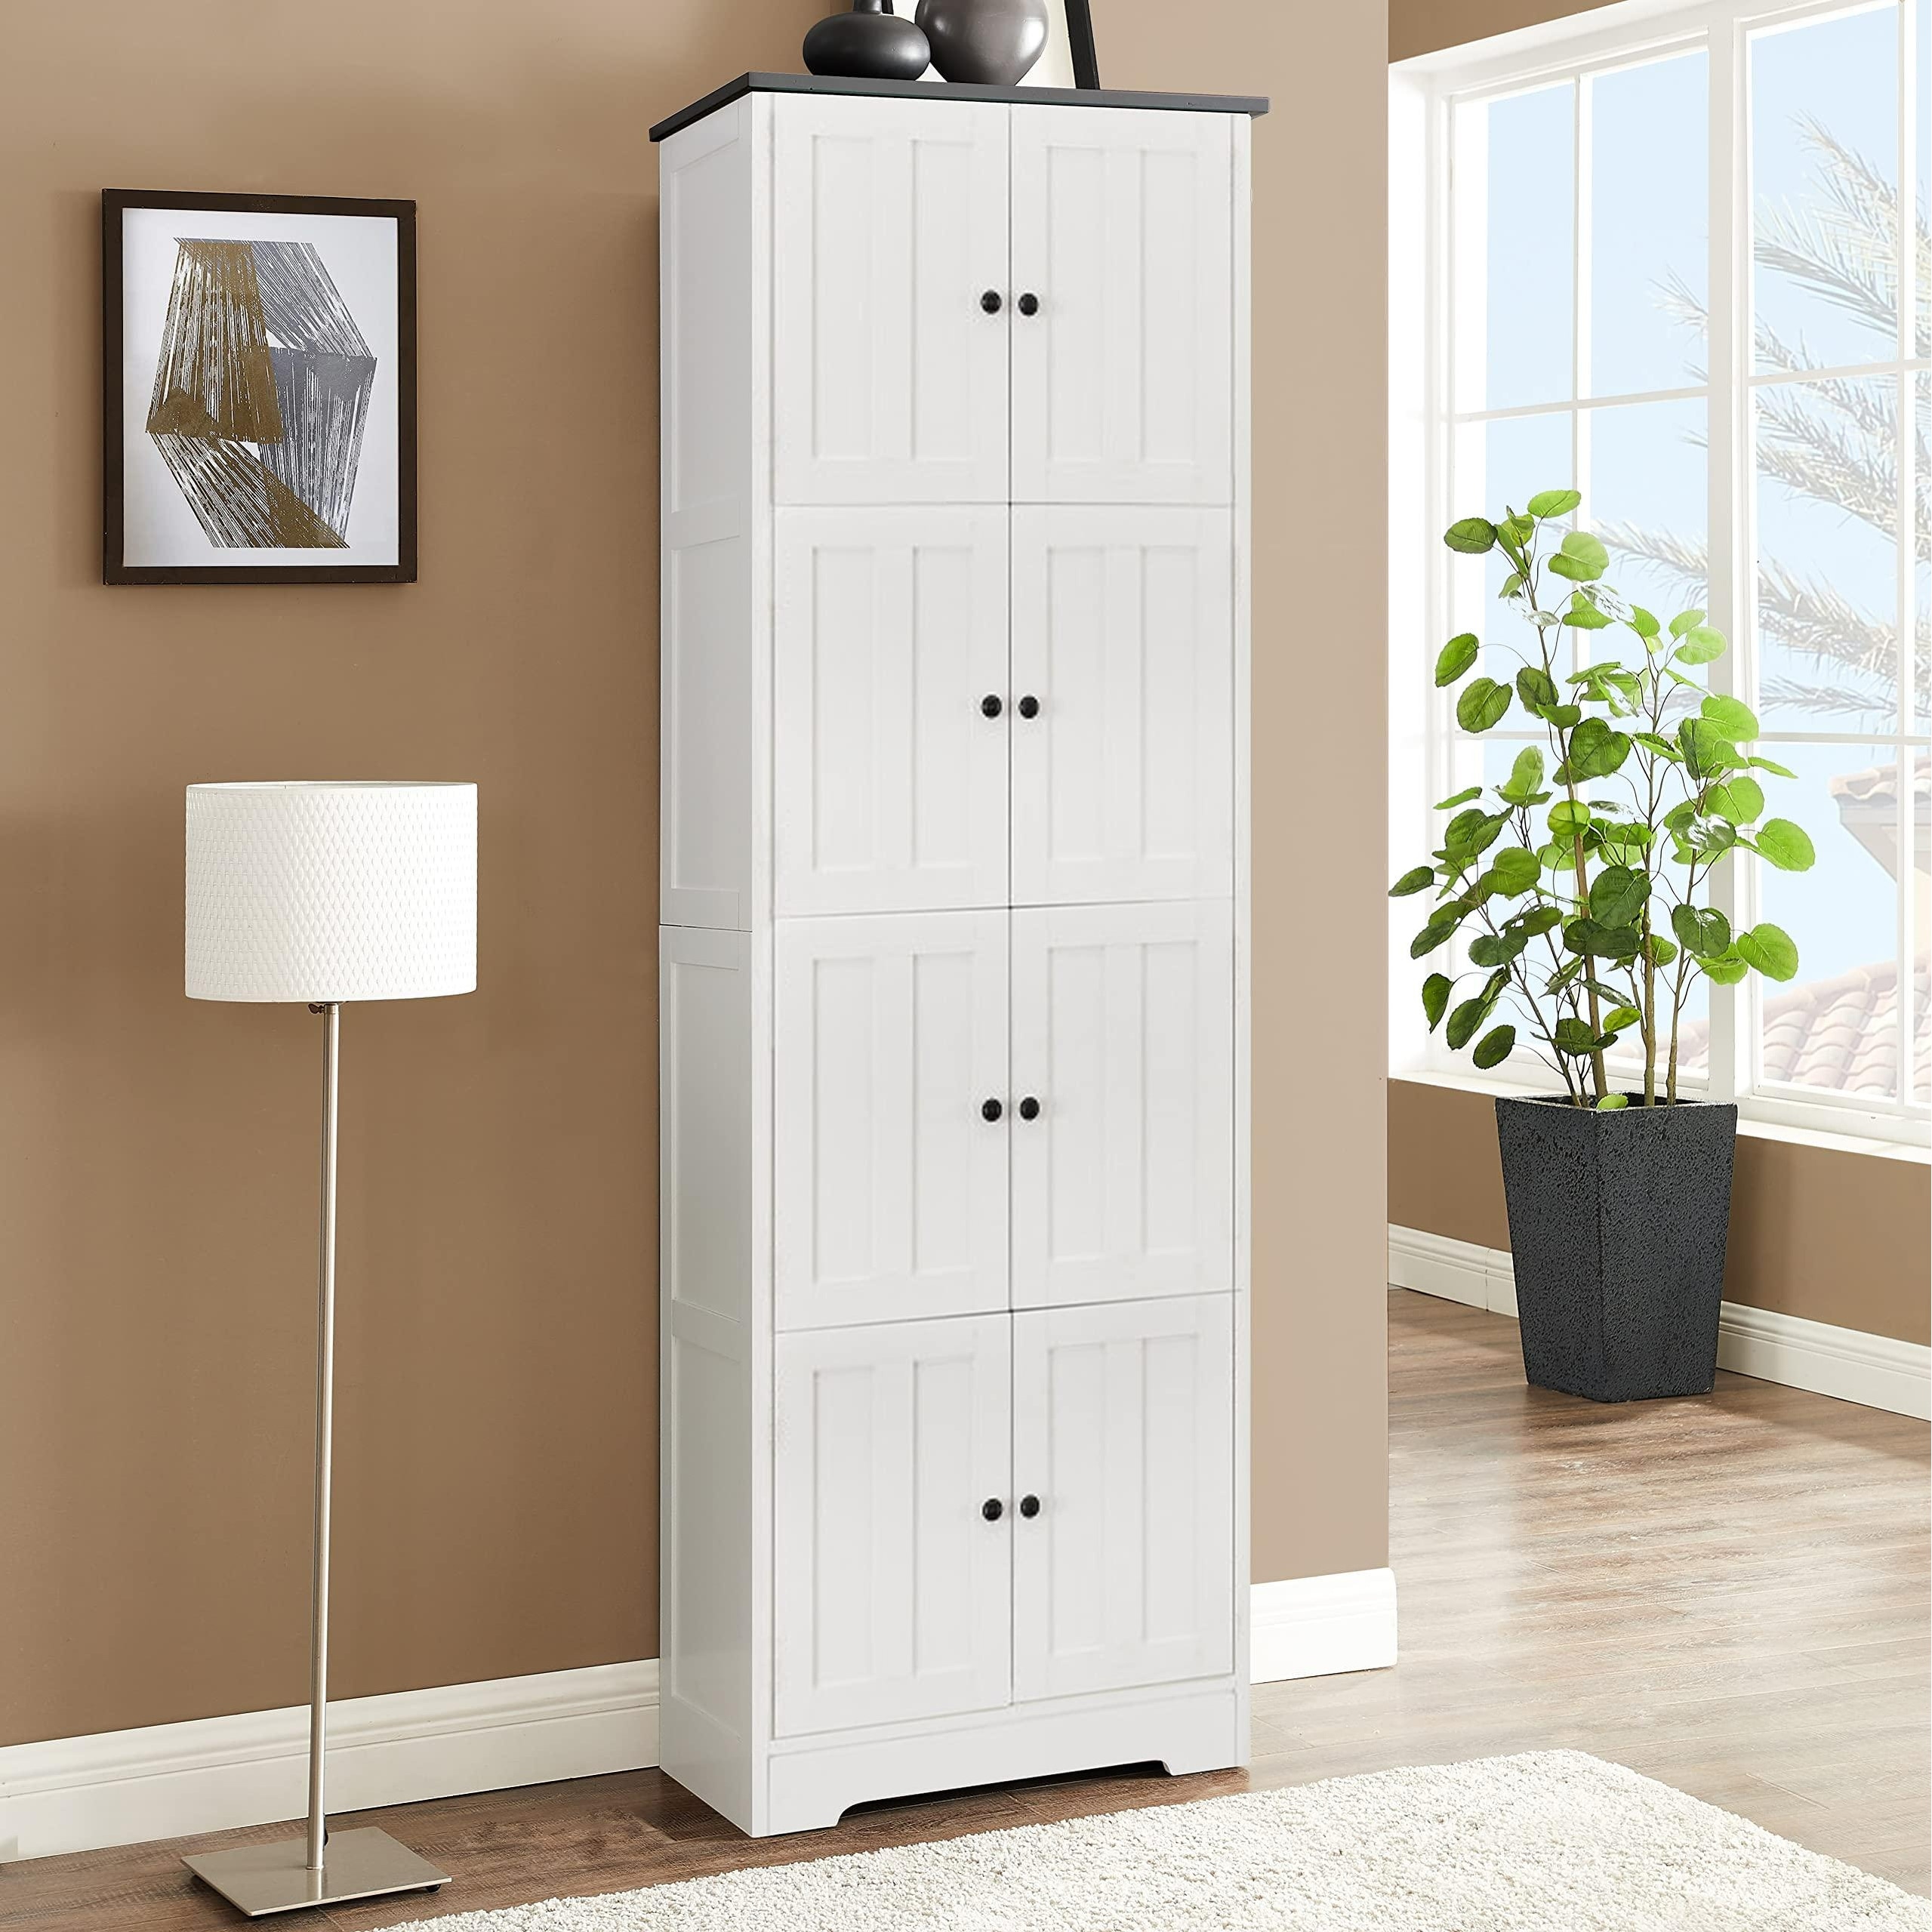 https://ak1.ostkcdn.com/images/products/is/images/direct/7e74a0d4a62a96b4a7a2cb2273bf7e4acbeb0125/Modern-Tall-Storage-Cabinet-with-Doors-and-Shelves%2C-Freestanding-Cabinet%2C-Bathroom-Cabinet%2C-Floor-Cabinet.jpg